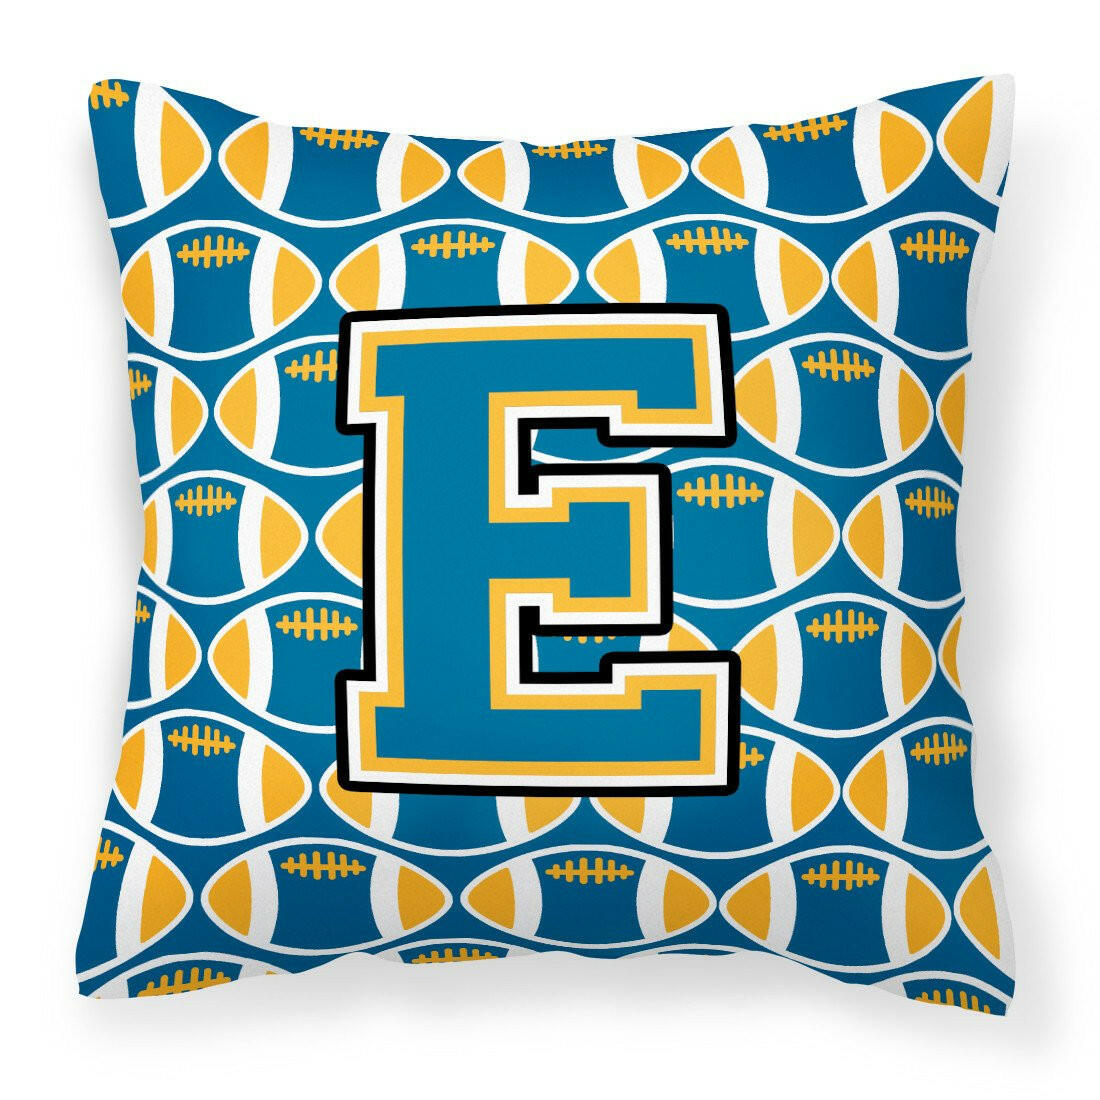 Letter E Football Blue and Gold Fabric Decorative Pillow CJ1077-EPW1414 by Caroline's Treasures